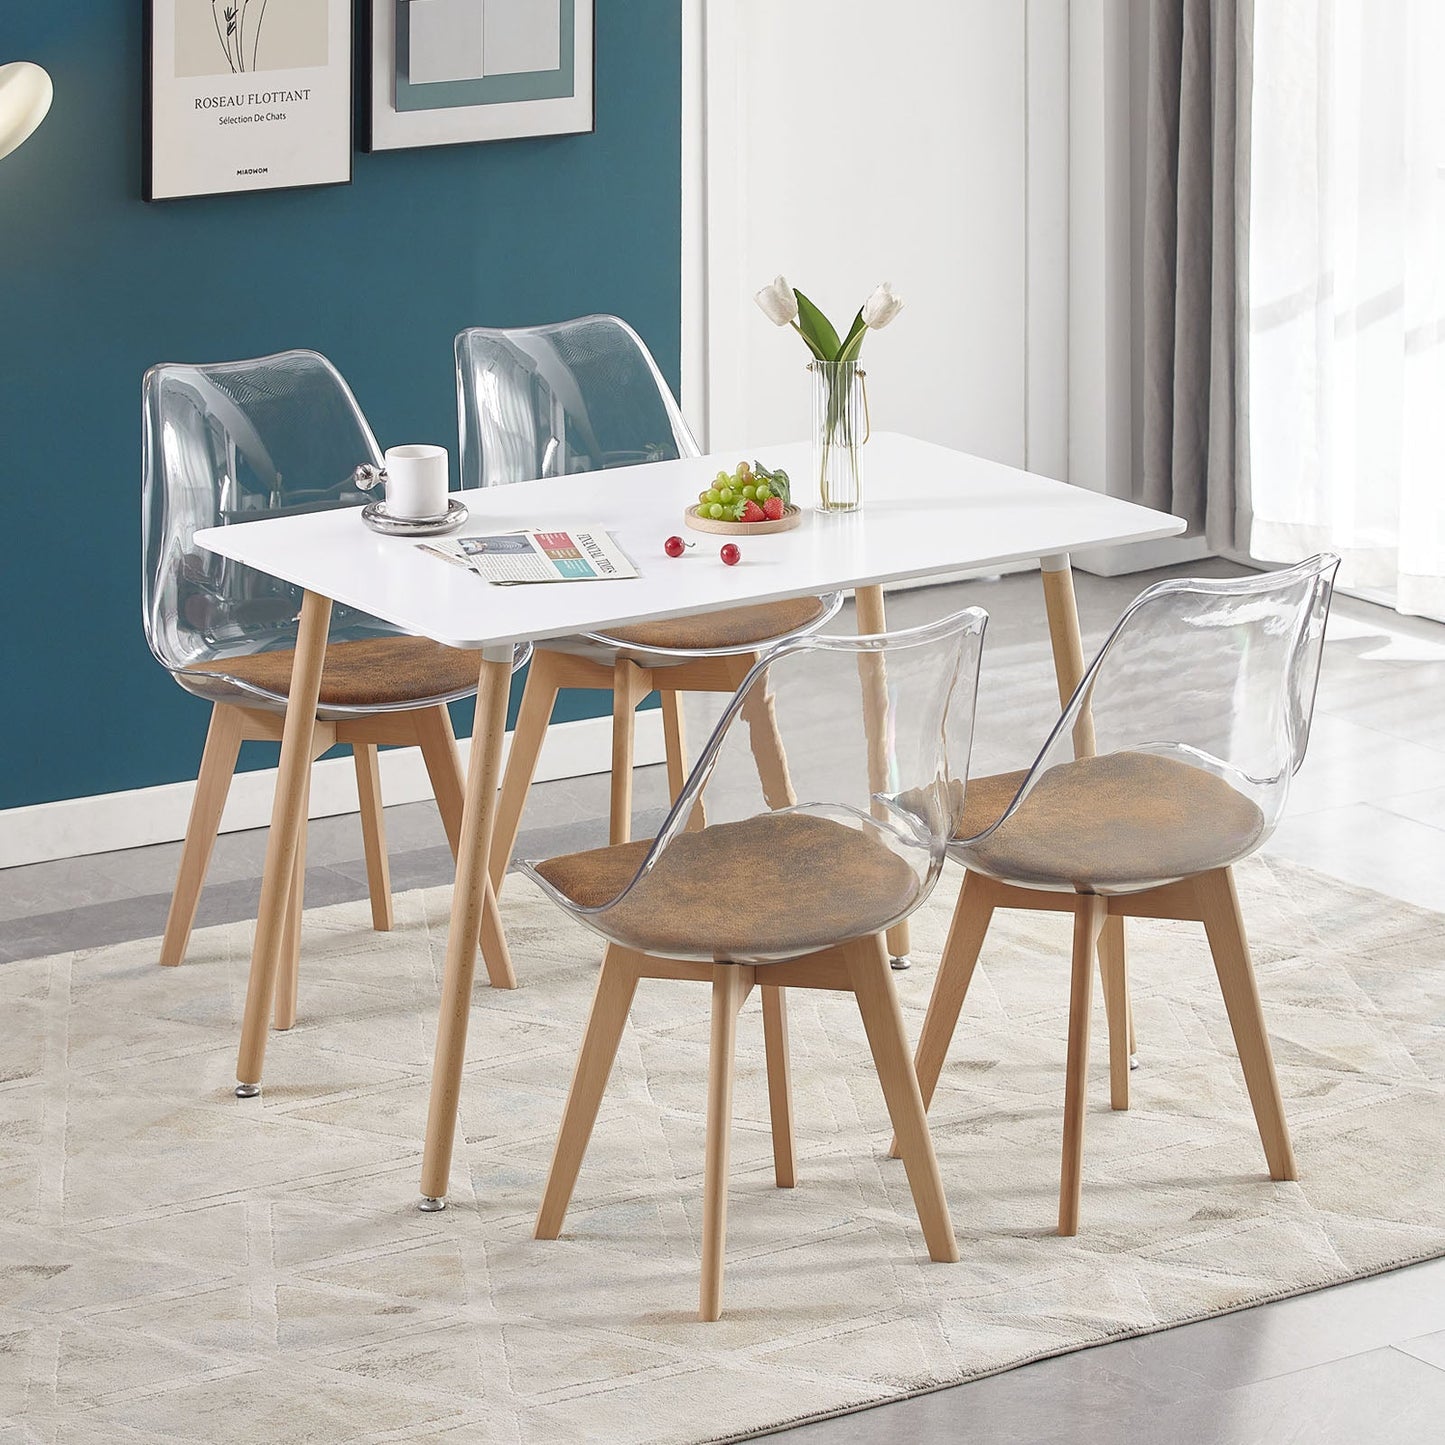 LUCCA Transparent Chair Set of 4